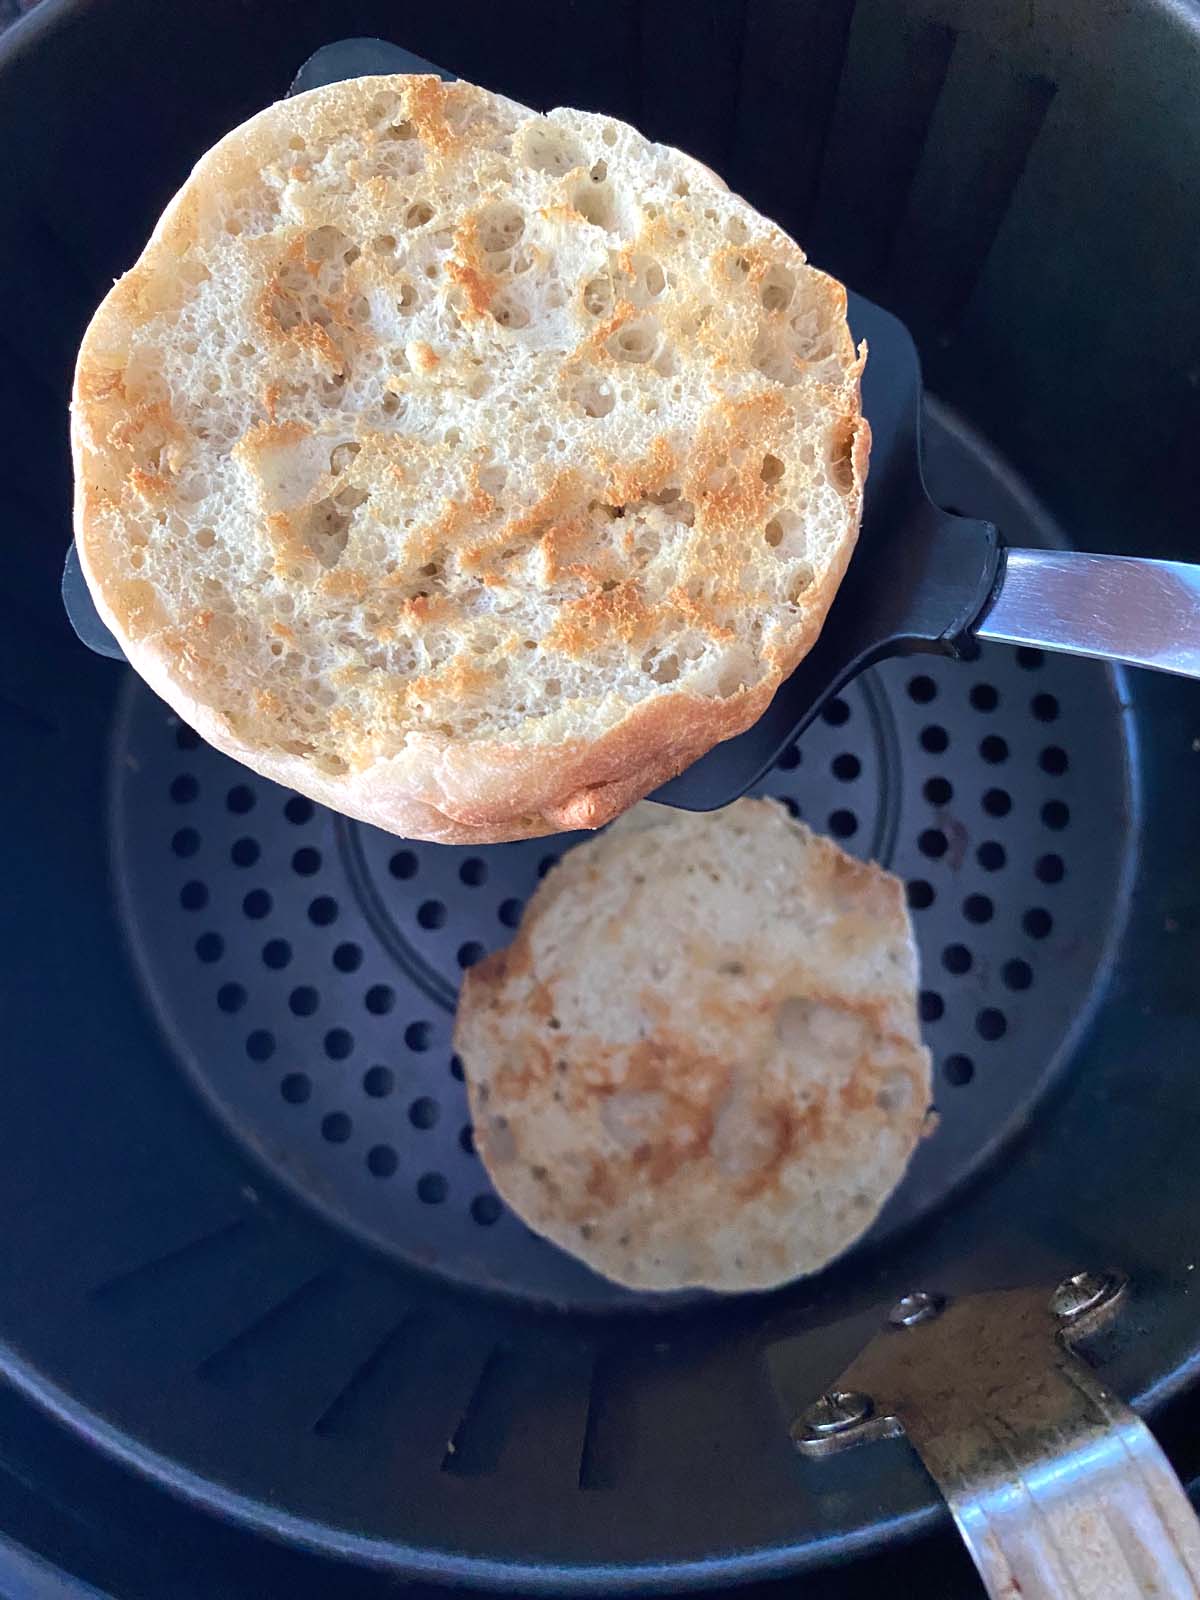 Toasted english muffin in the air fryer.